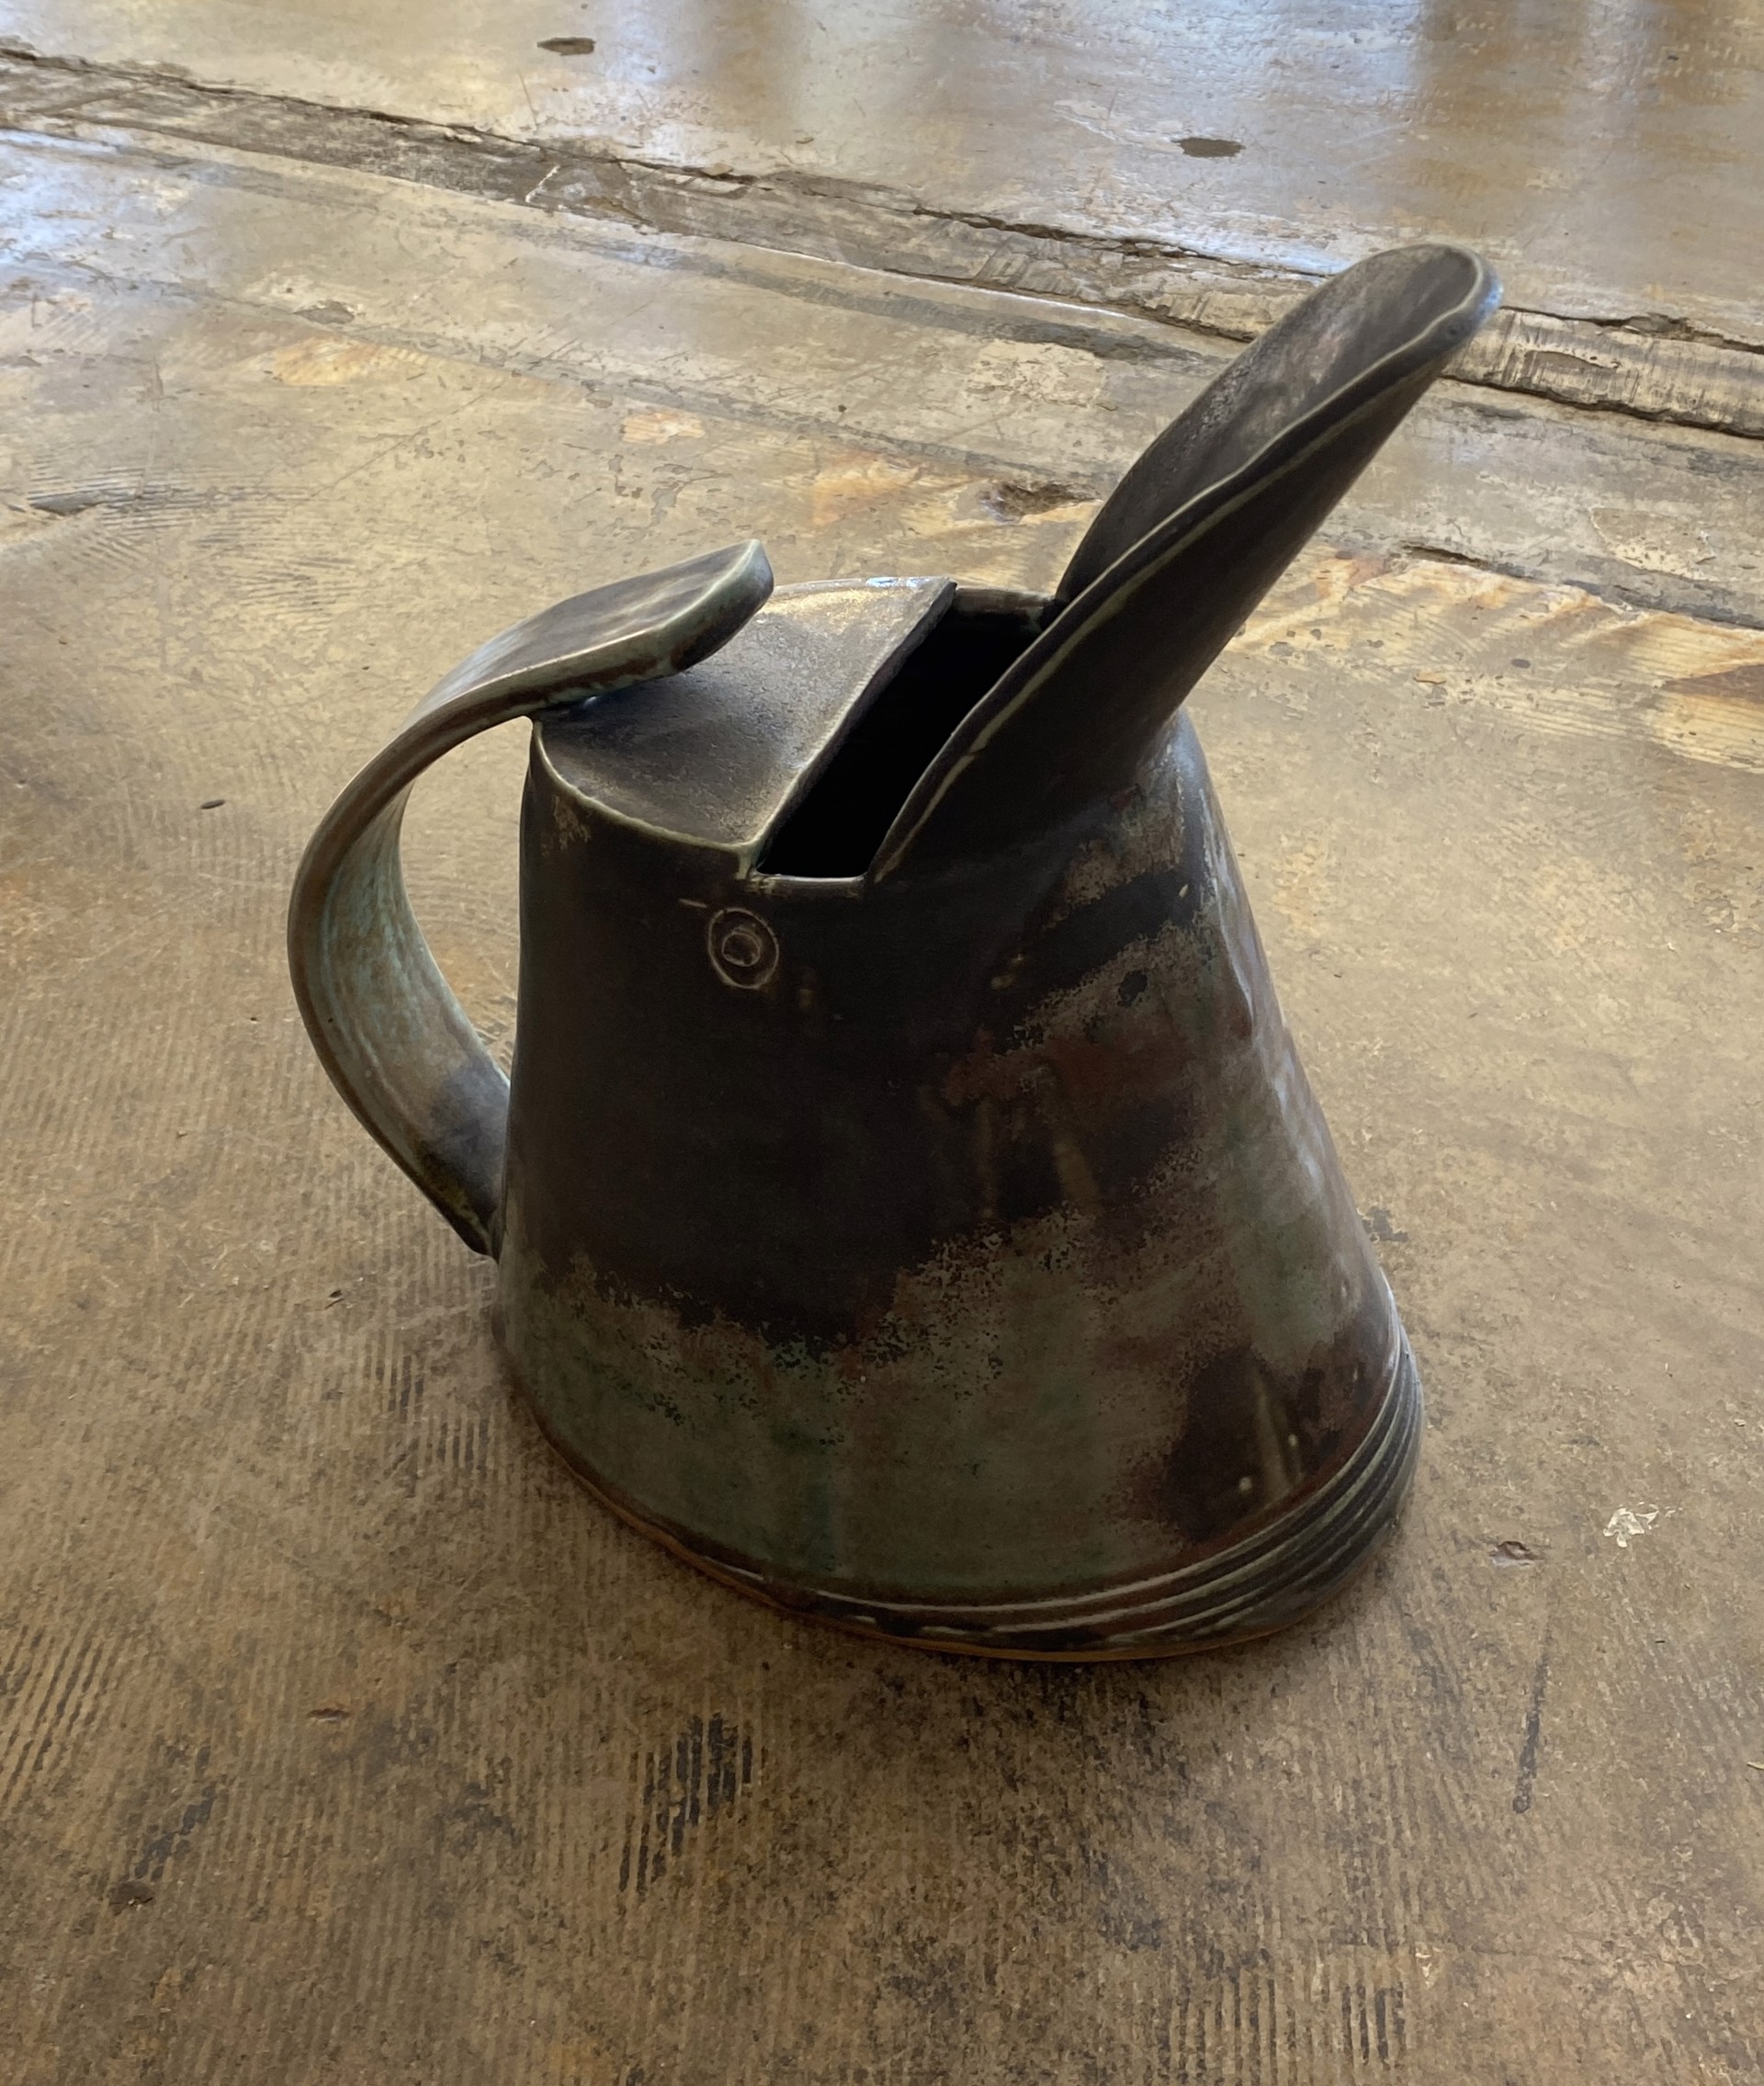 "Woodfired Green Oval Pitcher" by William Hershey circa 2003 by Art One Resale Inventory